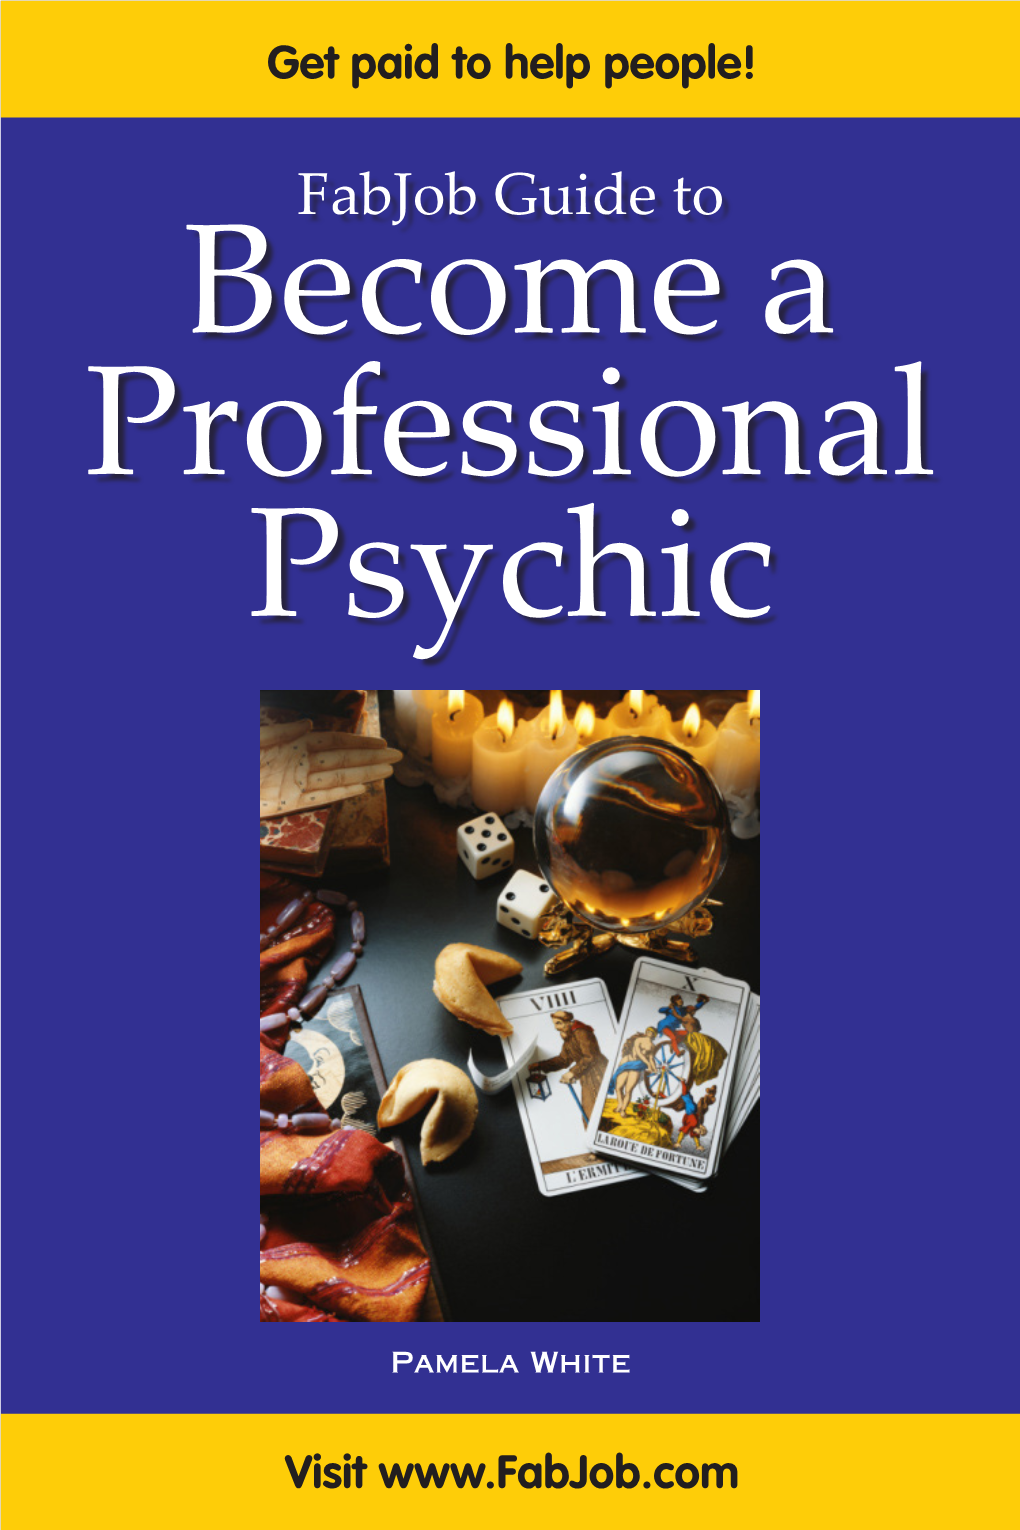 Become a Professional Psychic